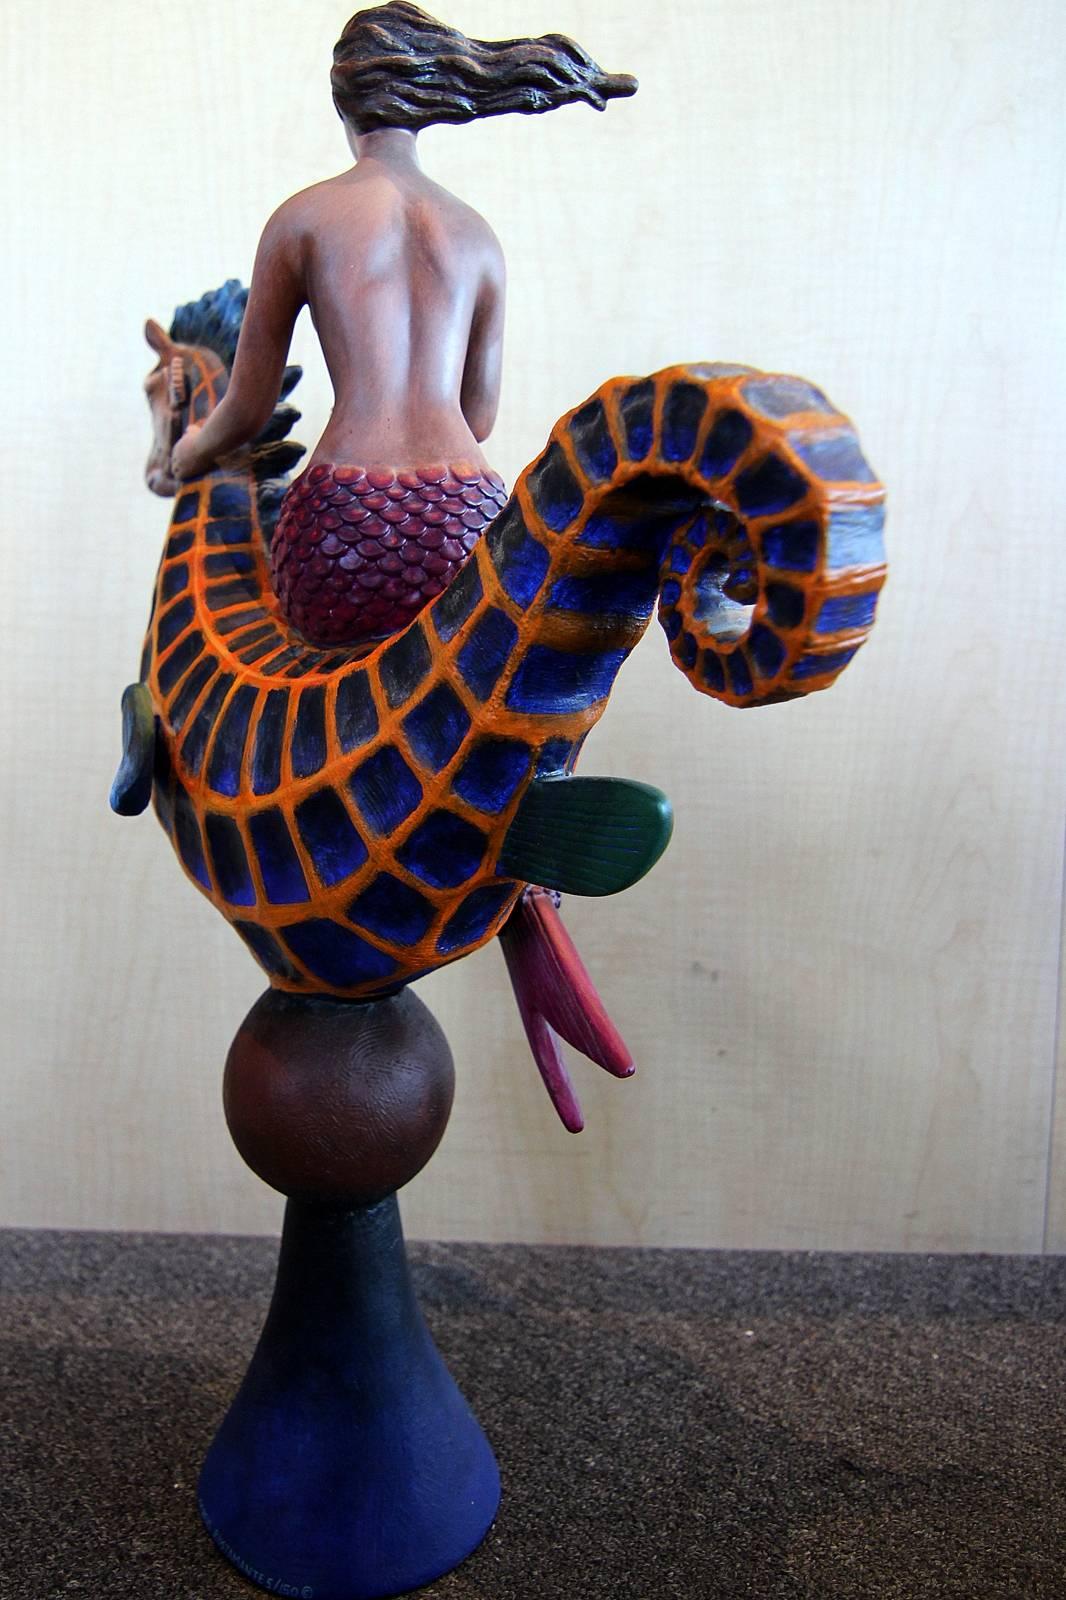 Resin sculpture of a mermaid riding a seahorse by Mexican artist Sergio Bustamante. The piece is hand signed and numbered 5/150 and was made in the mid-1980s. Great color and detail!